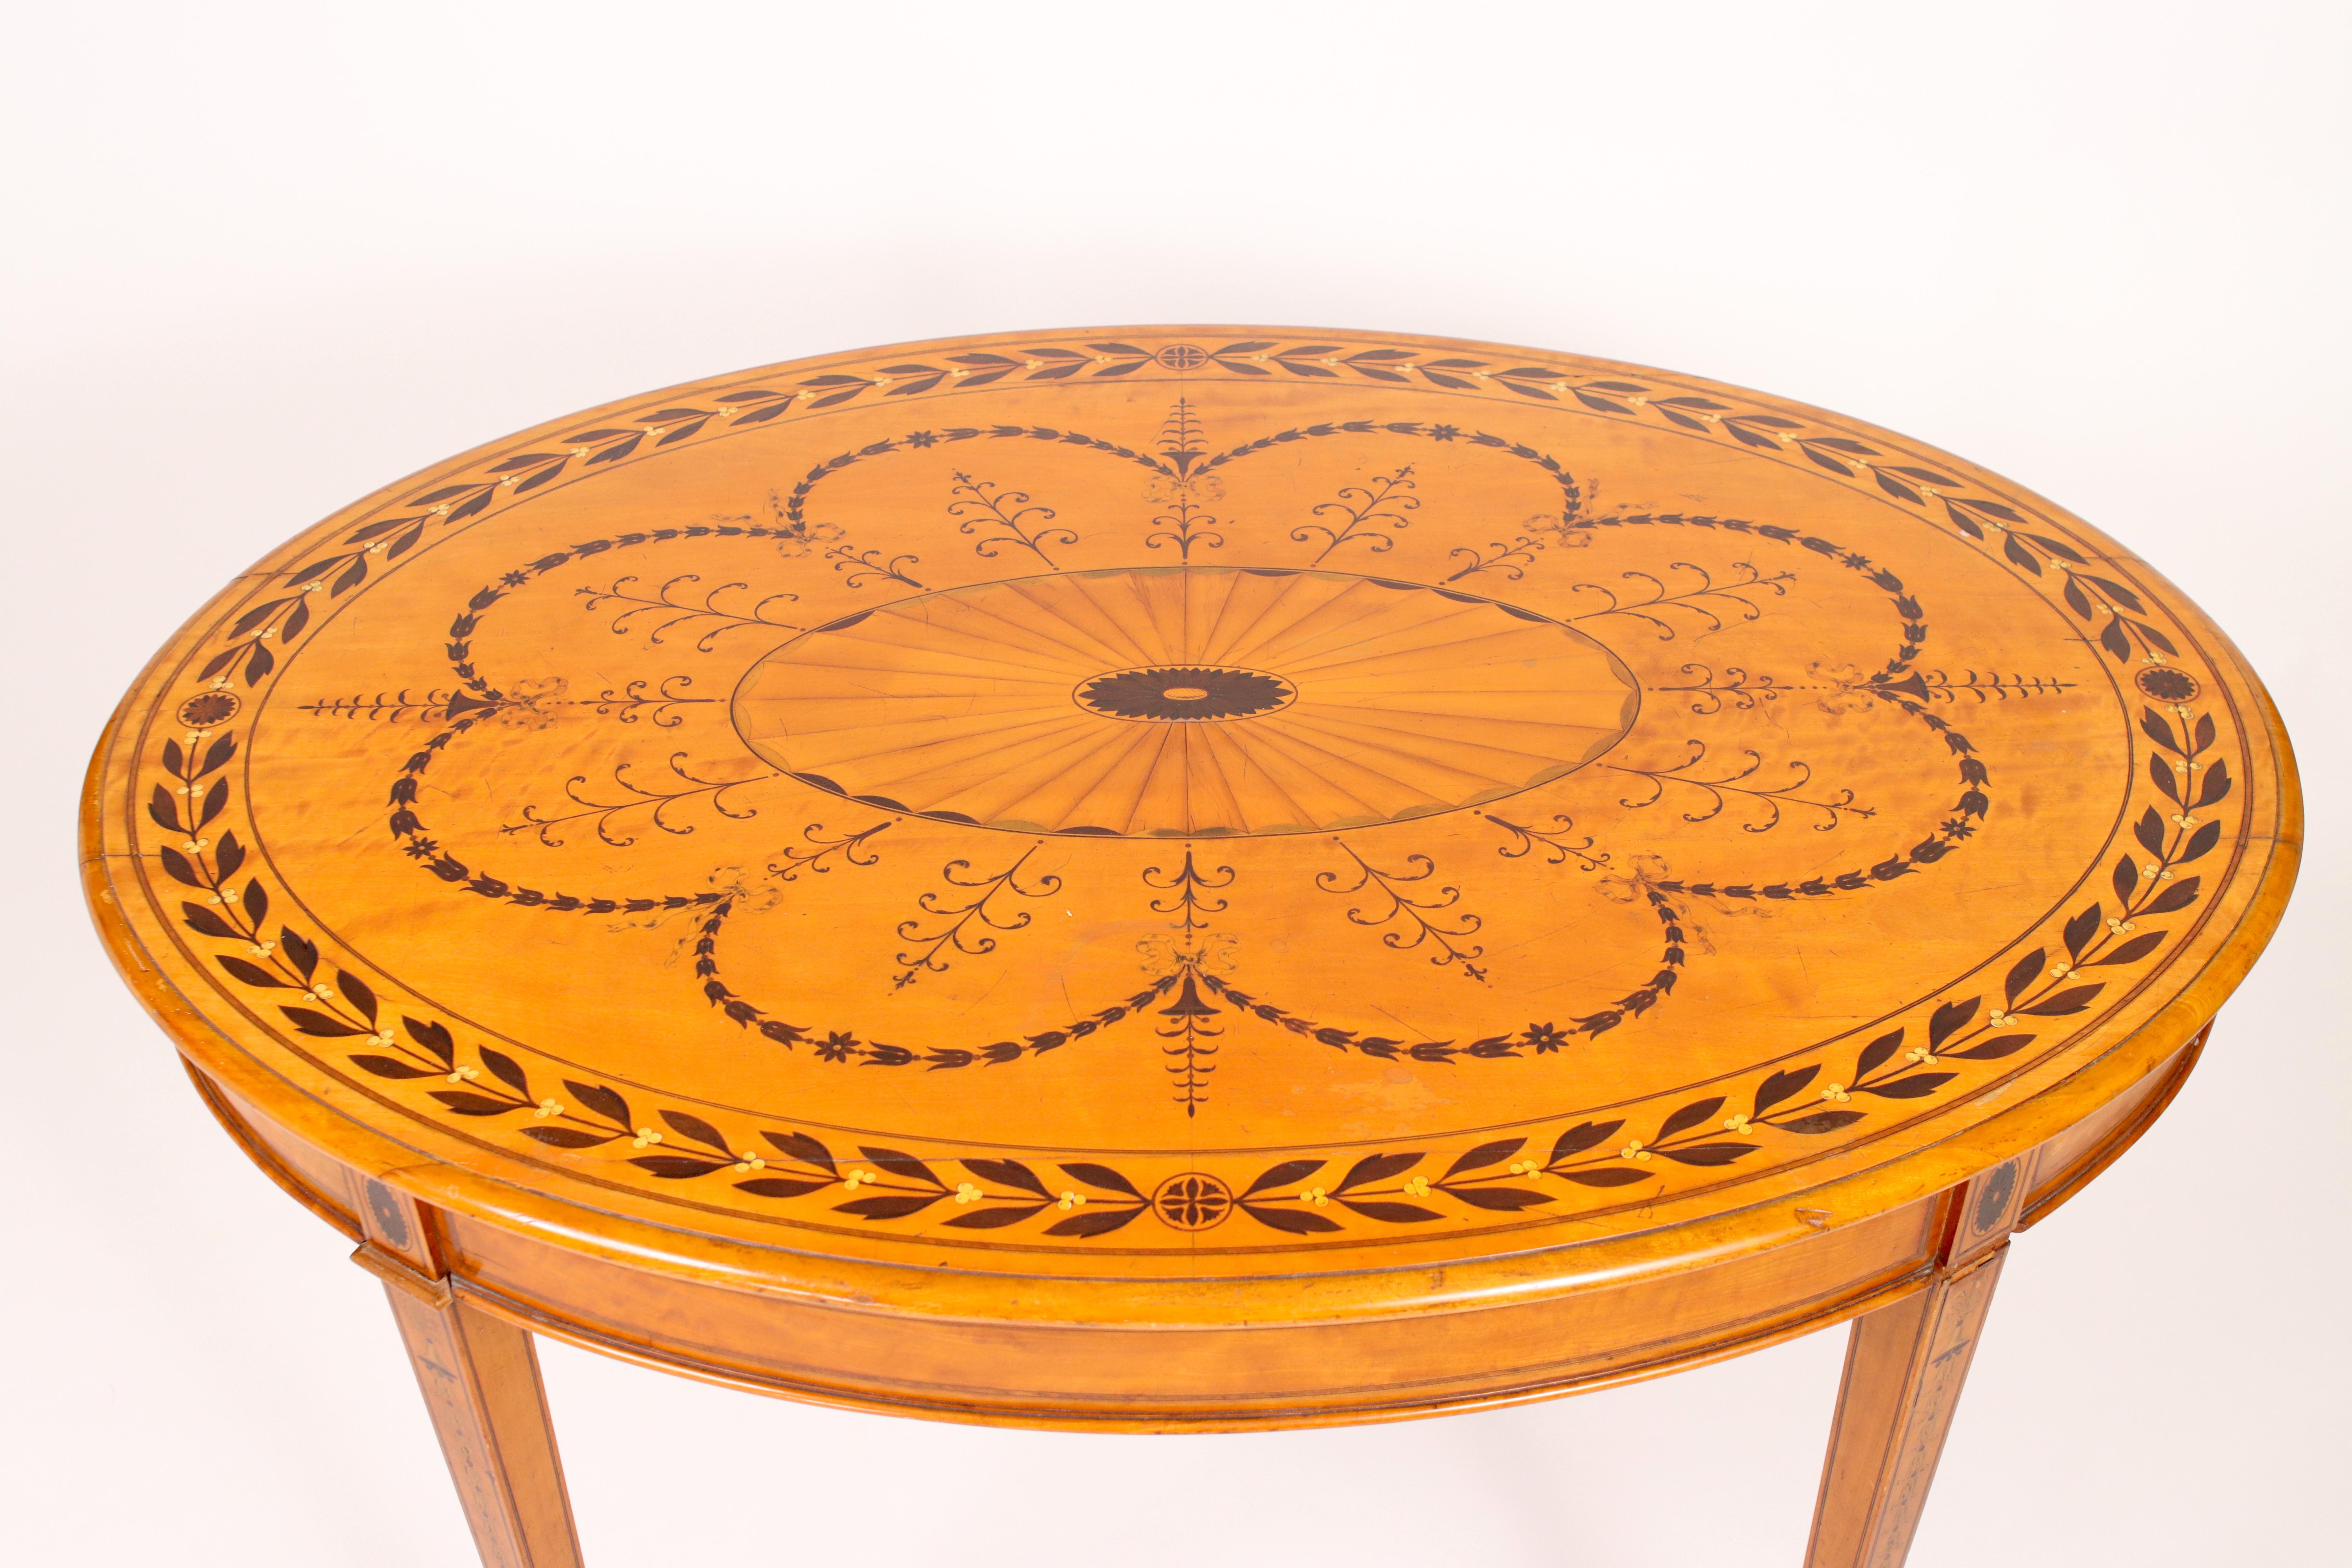 Fine turn of the century oval satinwood
Finely inlaid and hand painted centre table on four legs
All with original brass casters

18th century to the 1900s.

Hand painted, light brown satinwood European and Victorian oval centre table.